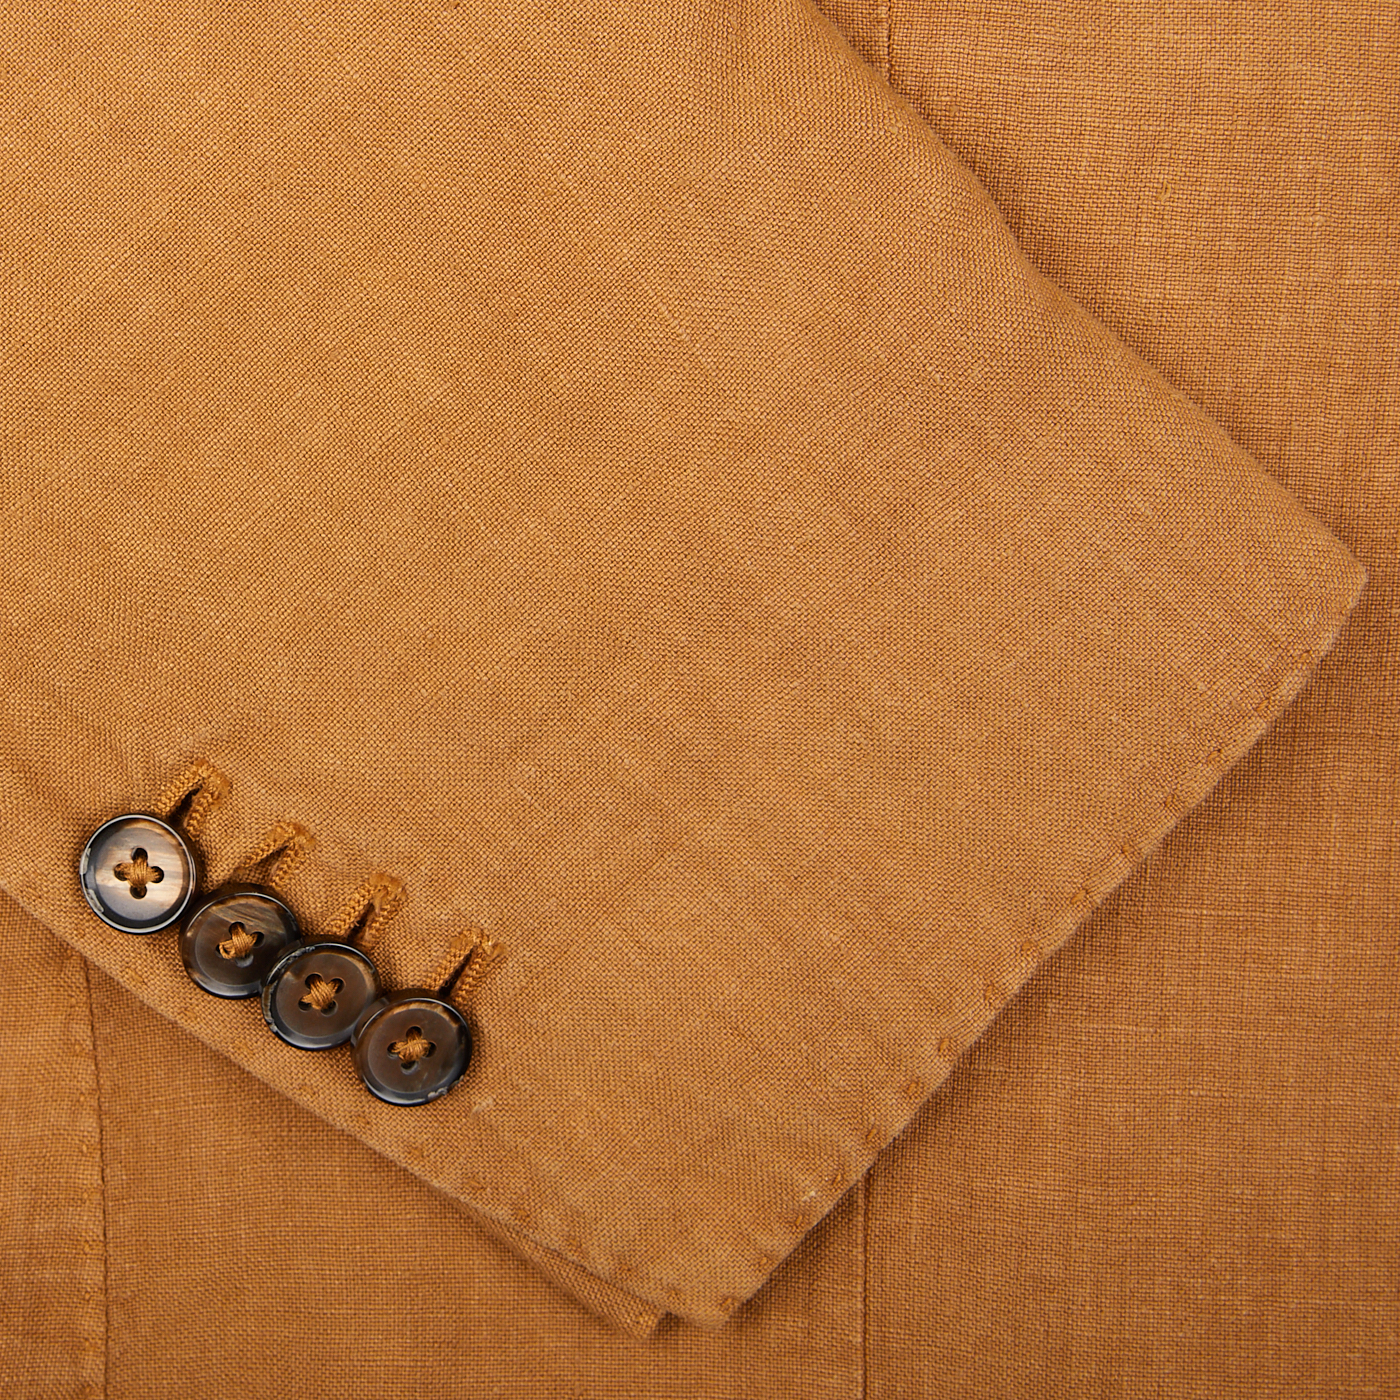 Close-up view of a Tobacco Brown Washed Linen Blazer with buttons by L.B.M. 1911.